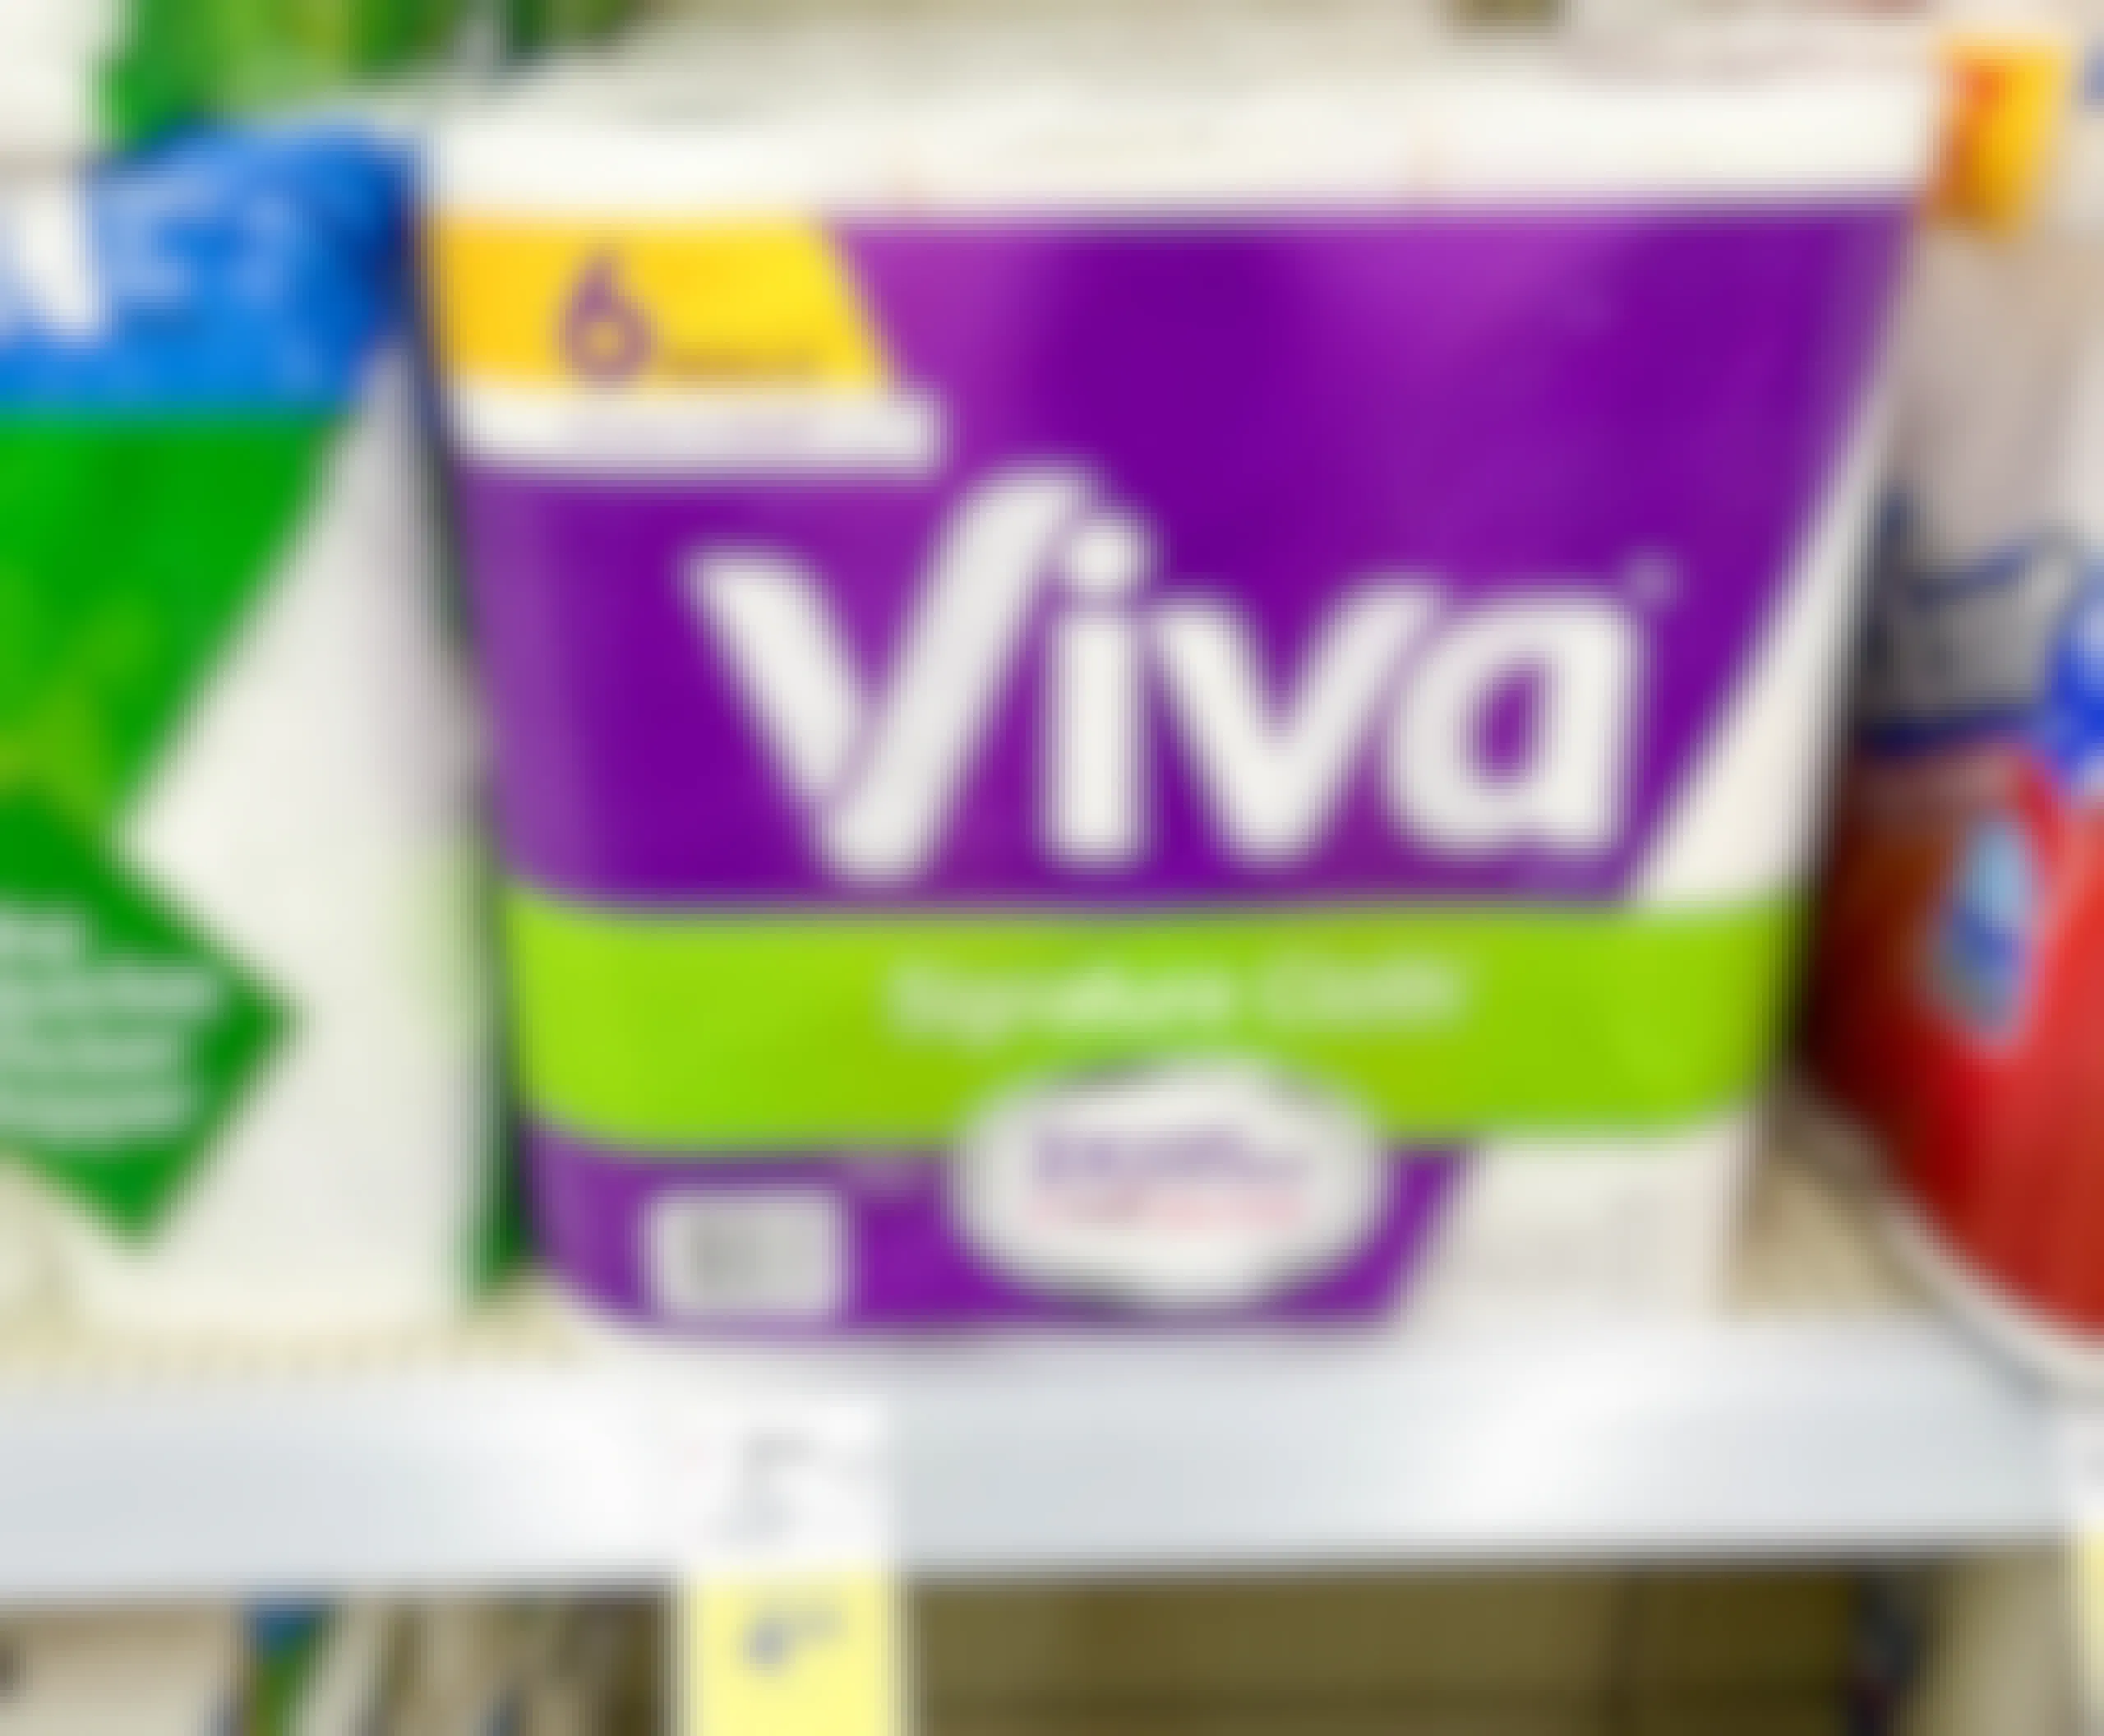 pack of Viva Signature Cloth Paper Towels on shelf with sales tag underneath